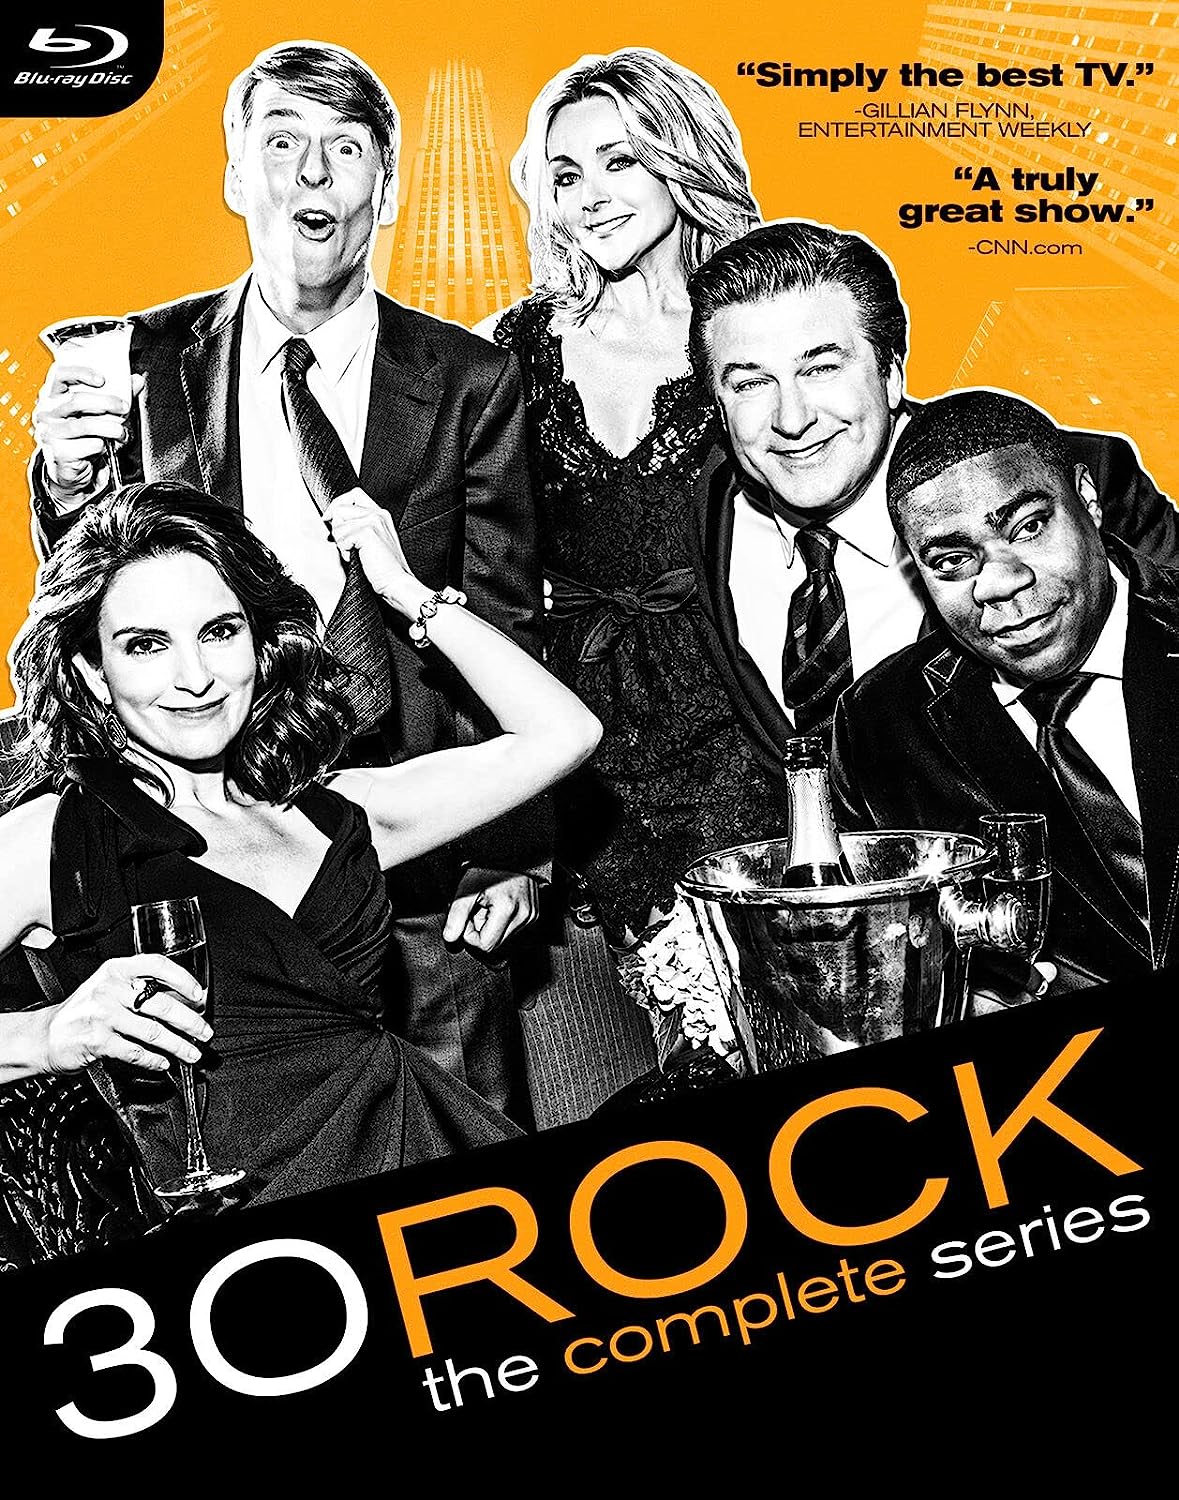 30 Rock The Complete Series Blu-Ray $36.99